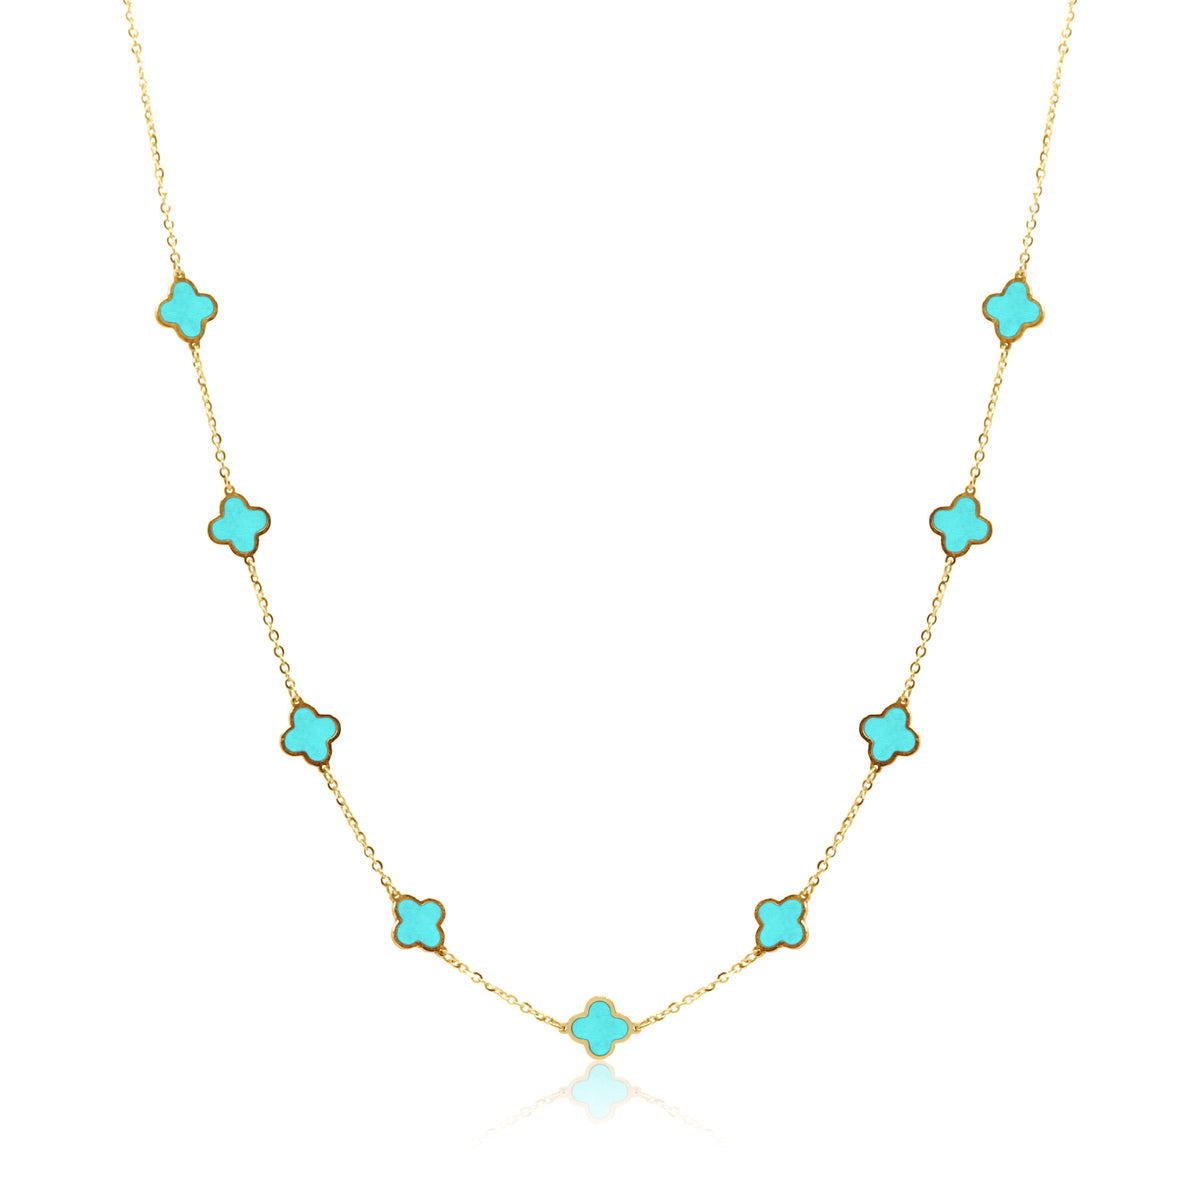 Stone Flower Necklace - Turquoise